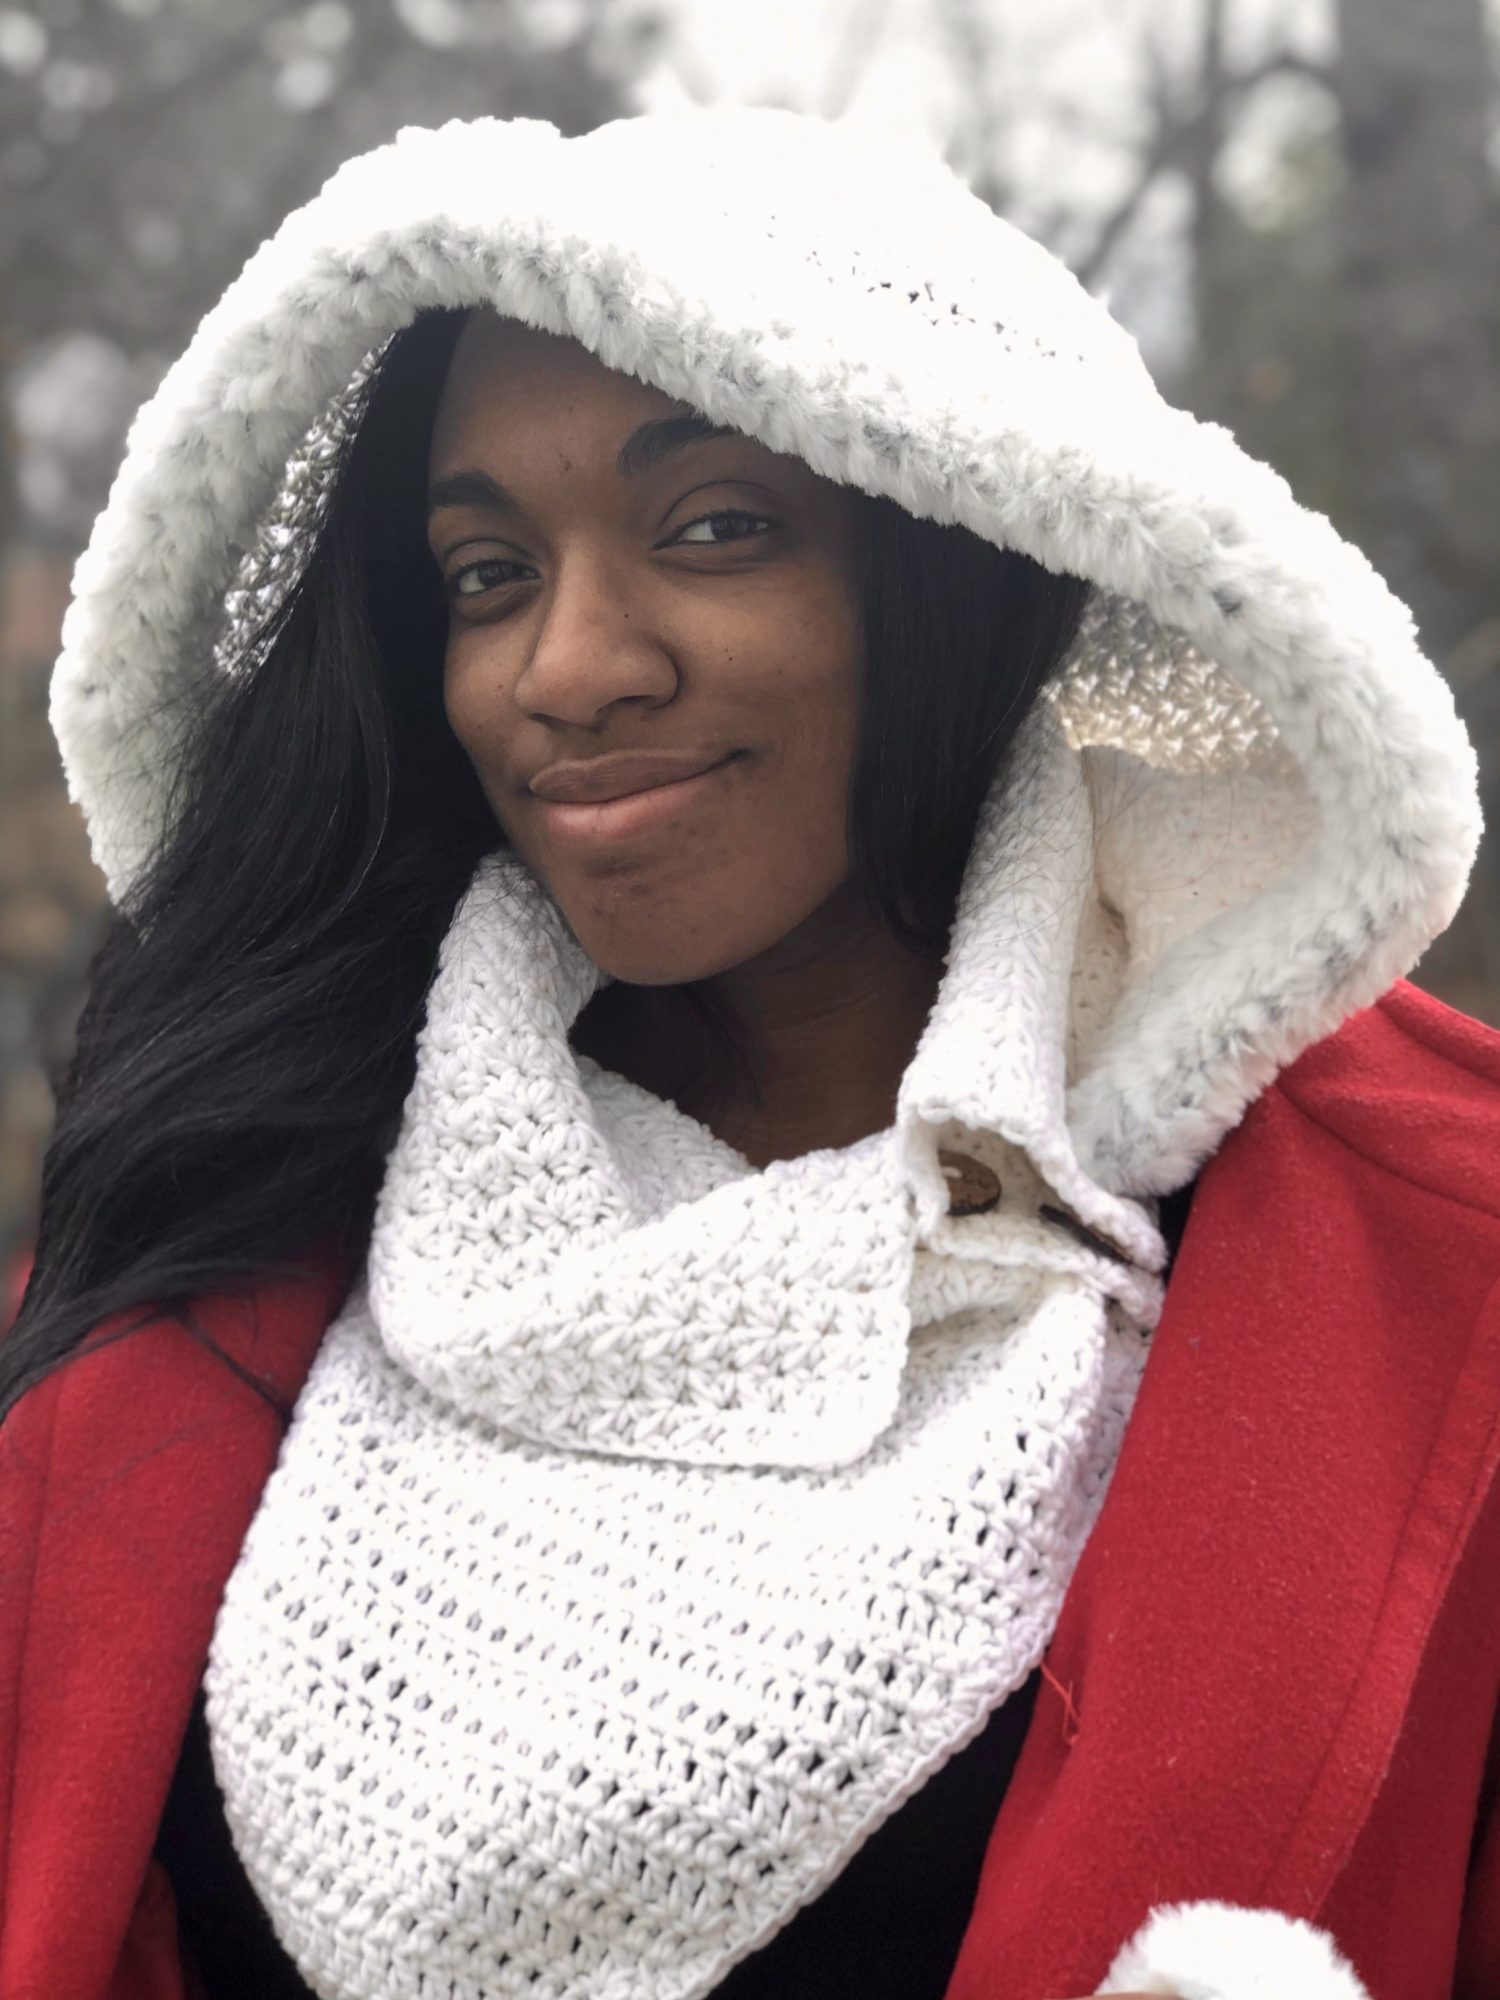 The Ashley Hooded Cowl offers subtle texture stitches, a button closure, and triangle front and back for added warmth. The shaped hood is removable.